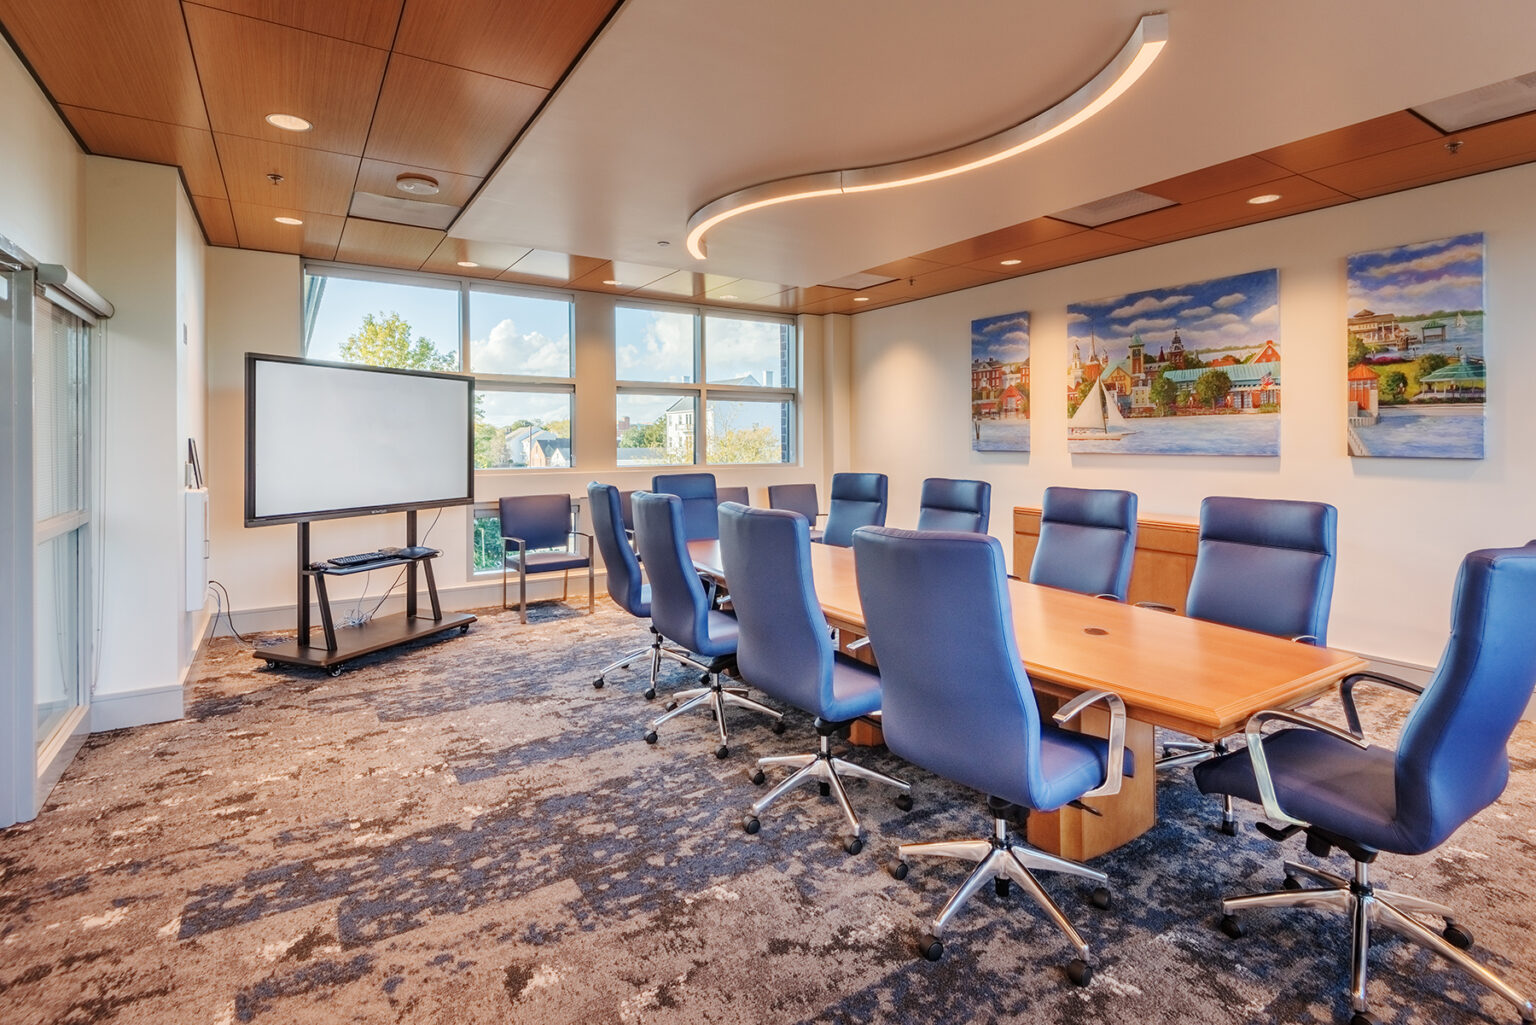 Modern conference room at New Bern Riverfront Convention Center